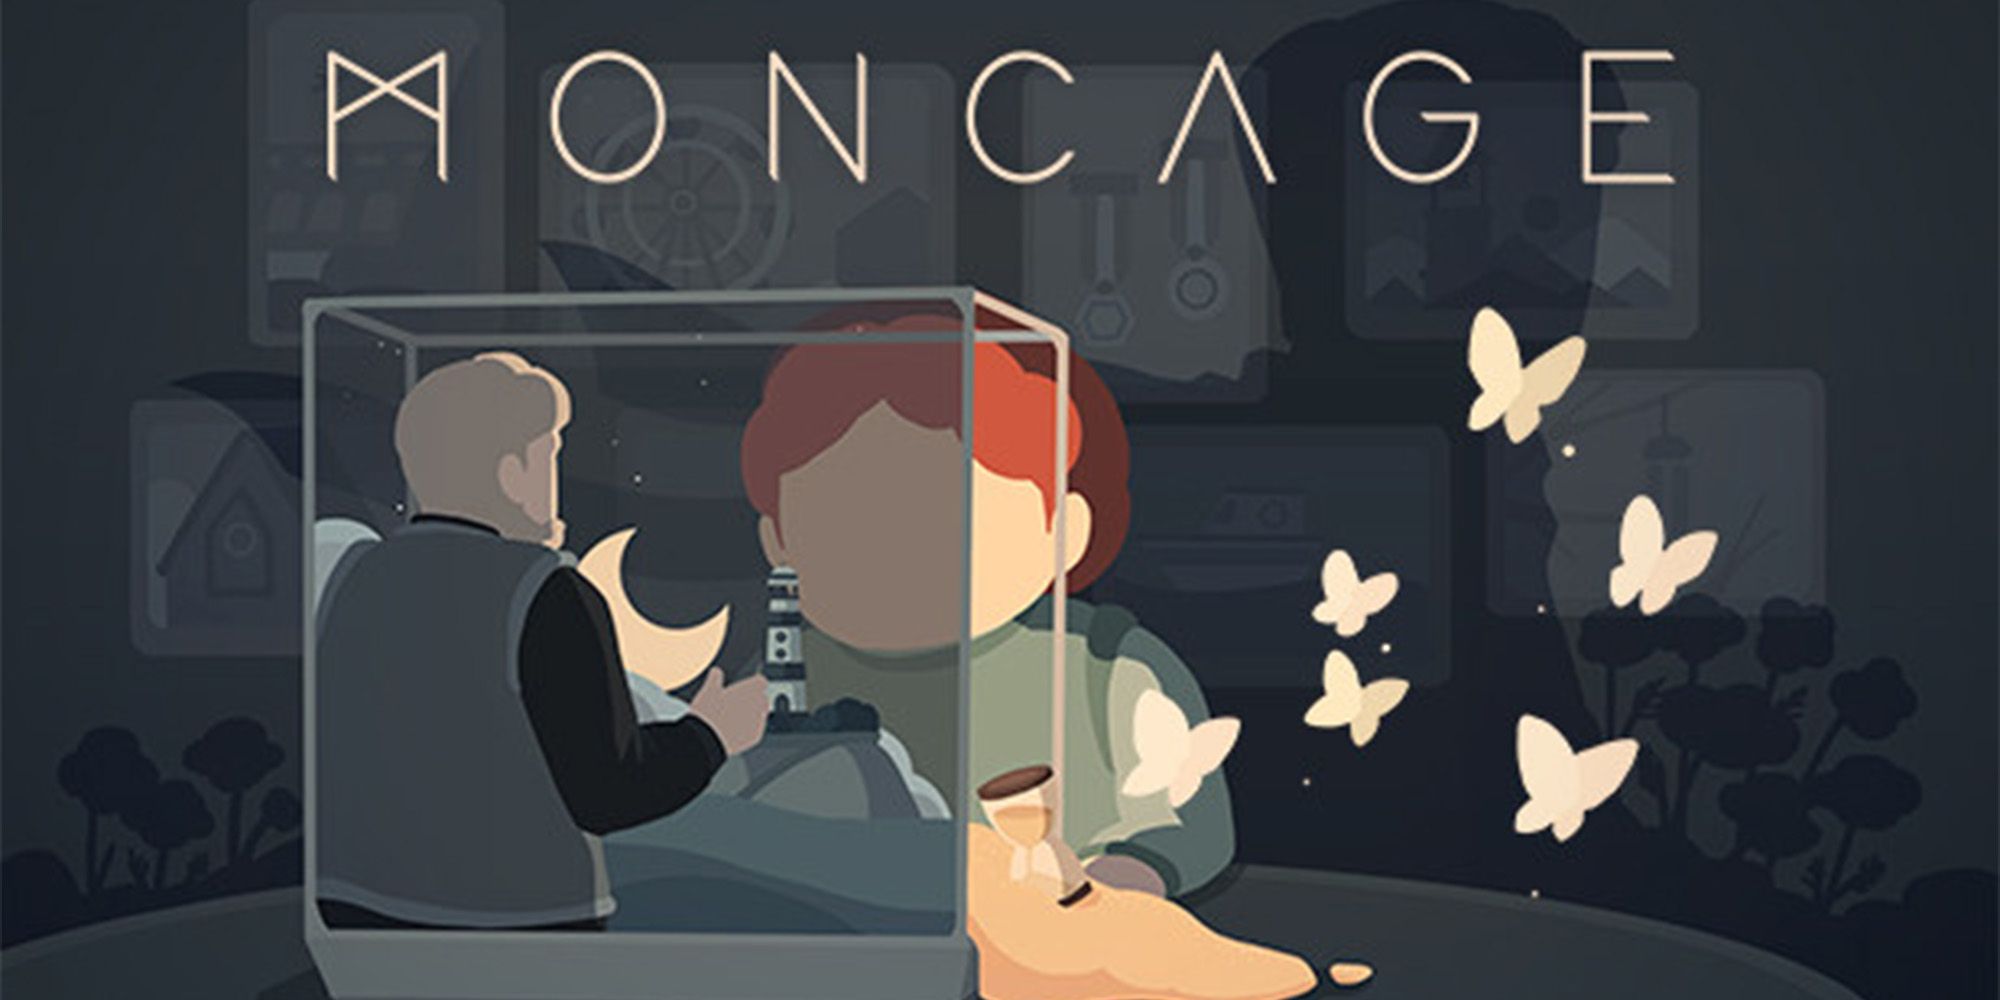 Title Art for the perspective puzzle game Moncage